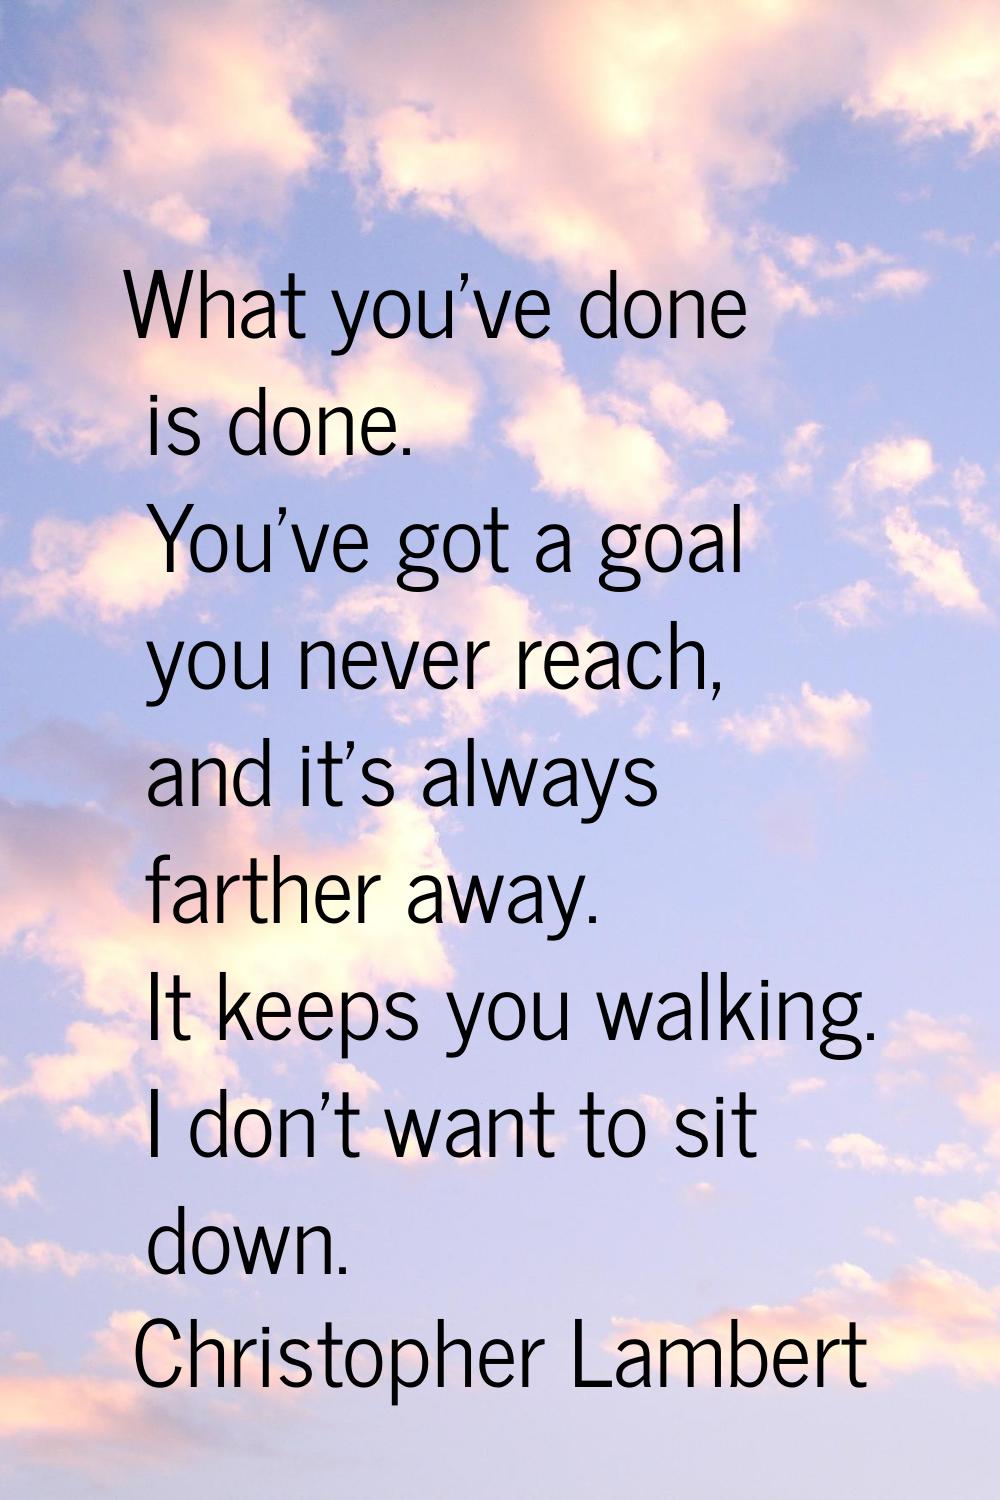 What you've done is done. You've got a goal you never reach, and it's always farther away. It keeps